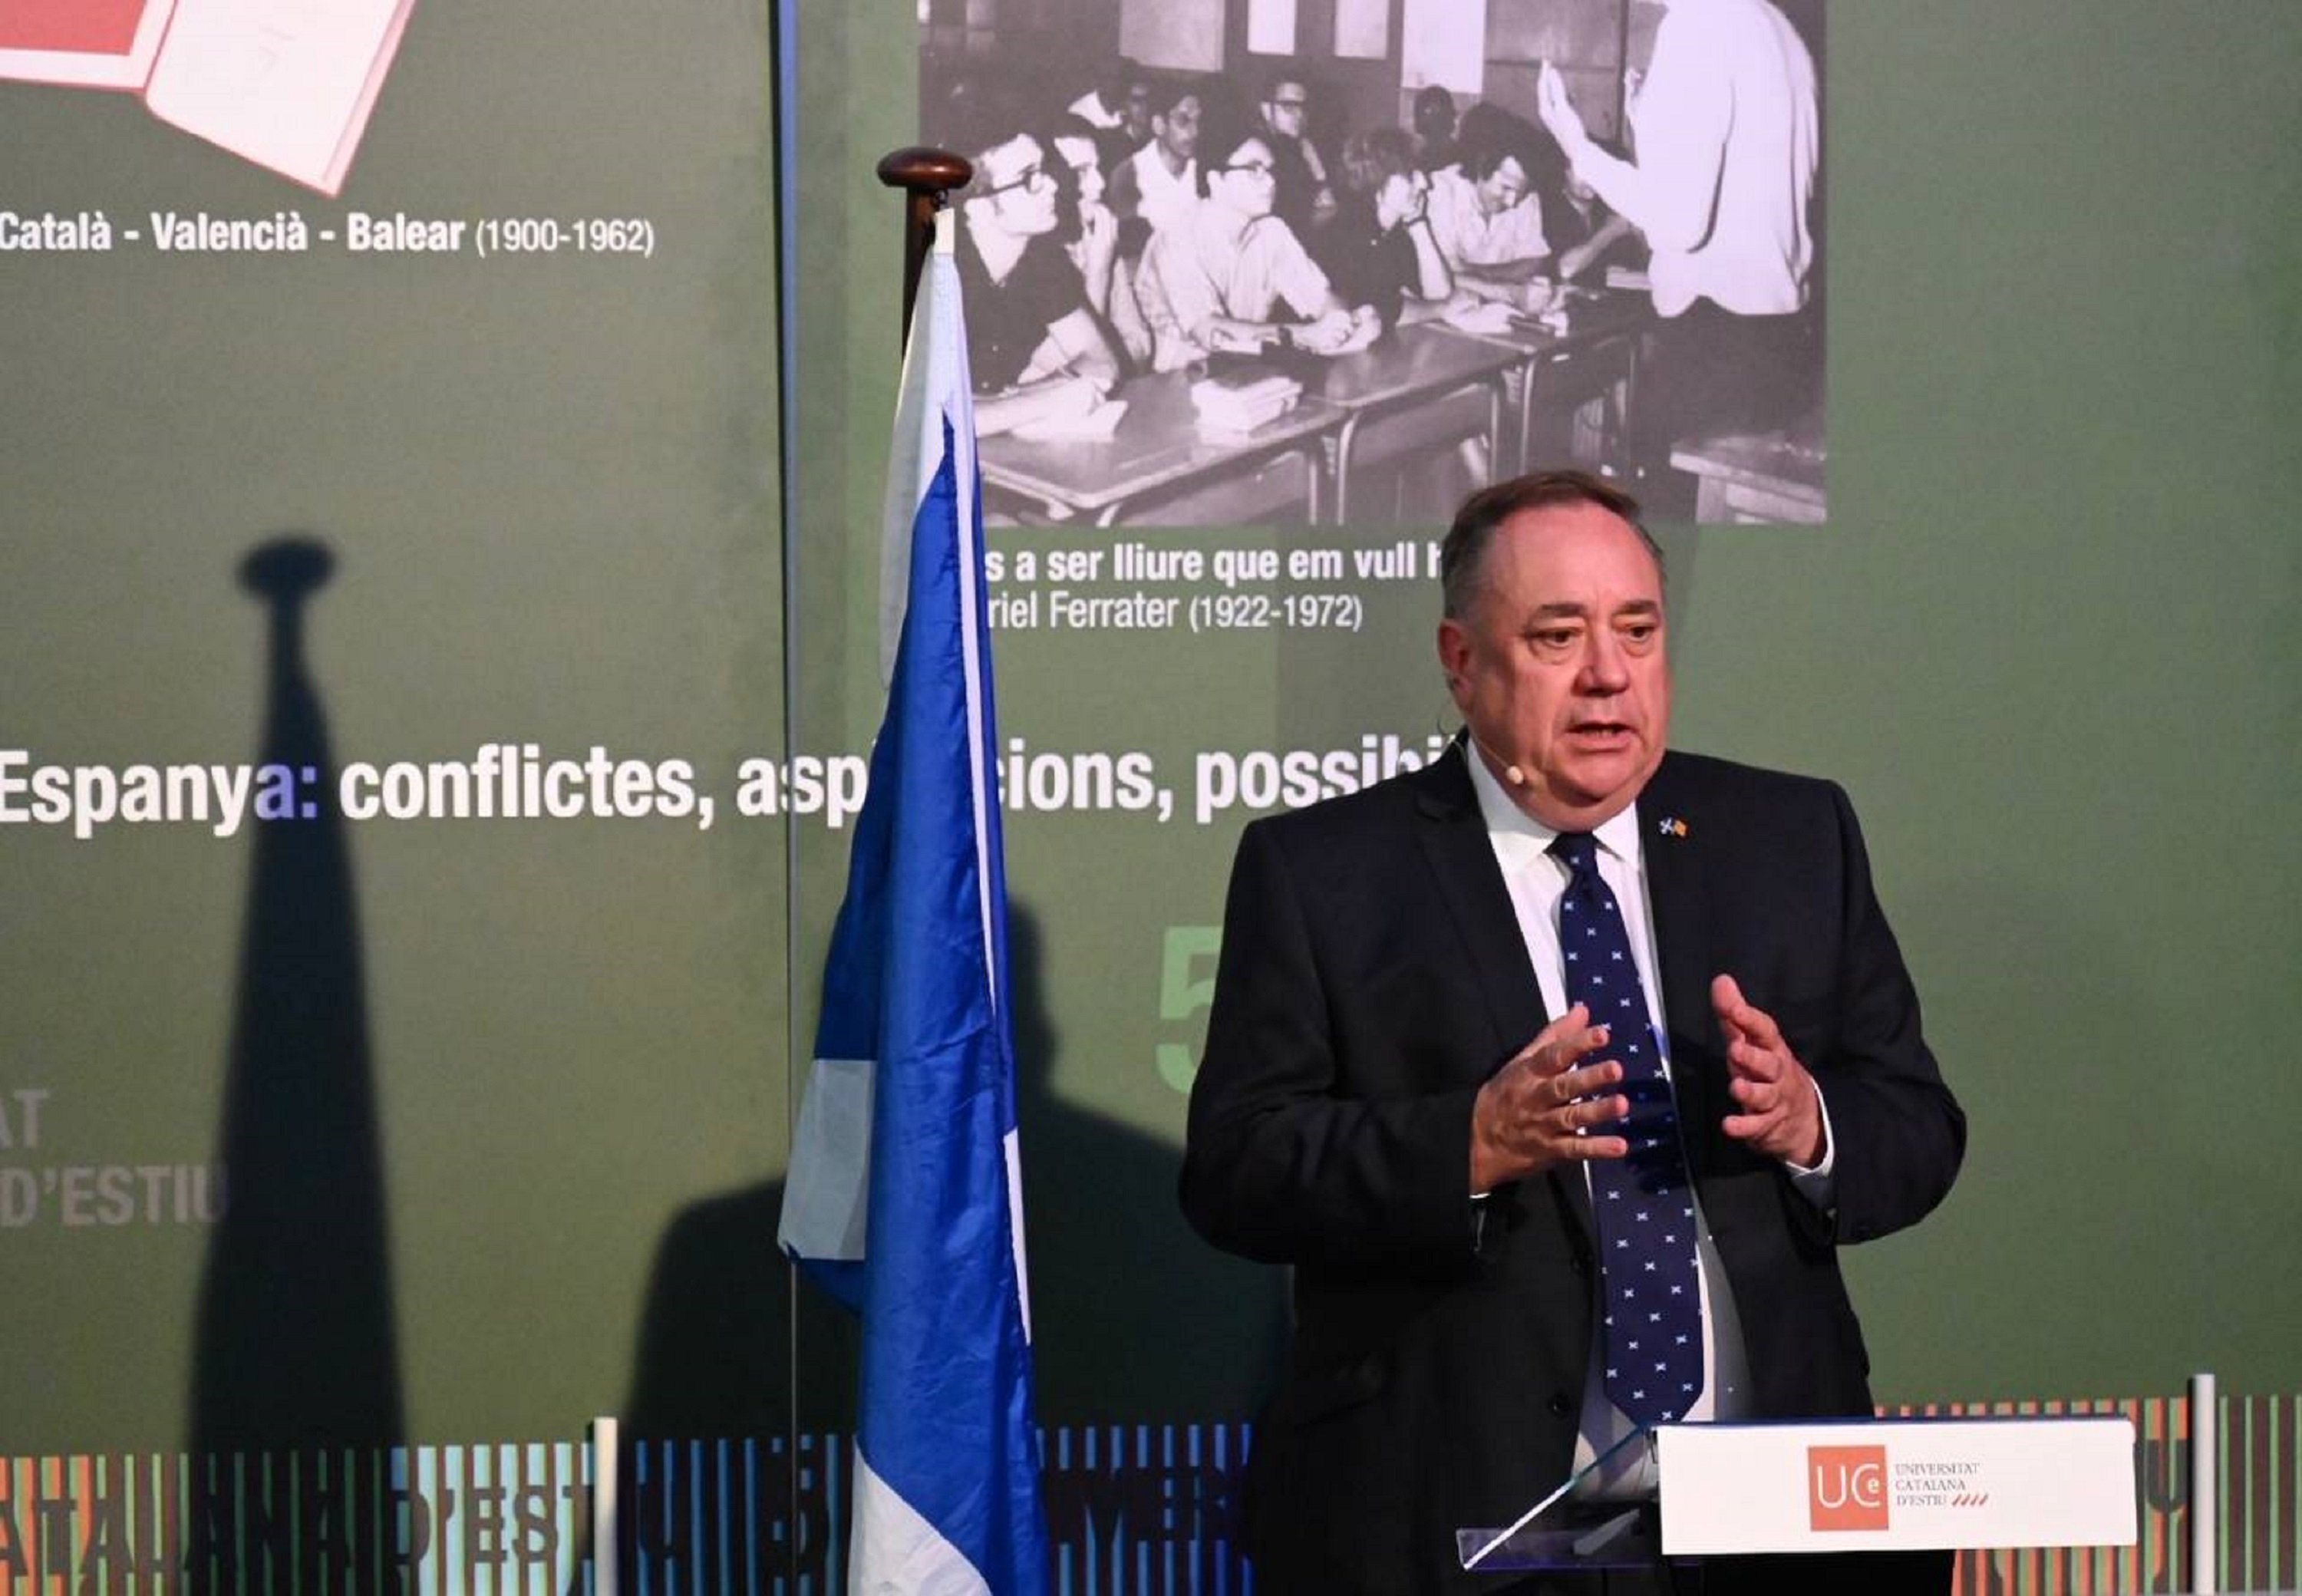 Alex Salmond: "They won't recognize you until you actually become independent"